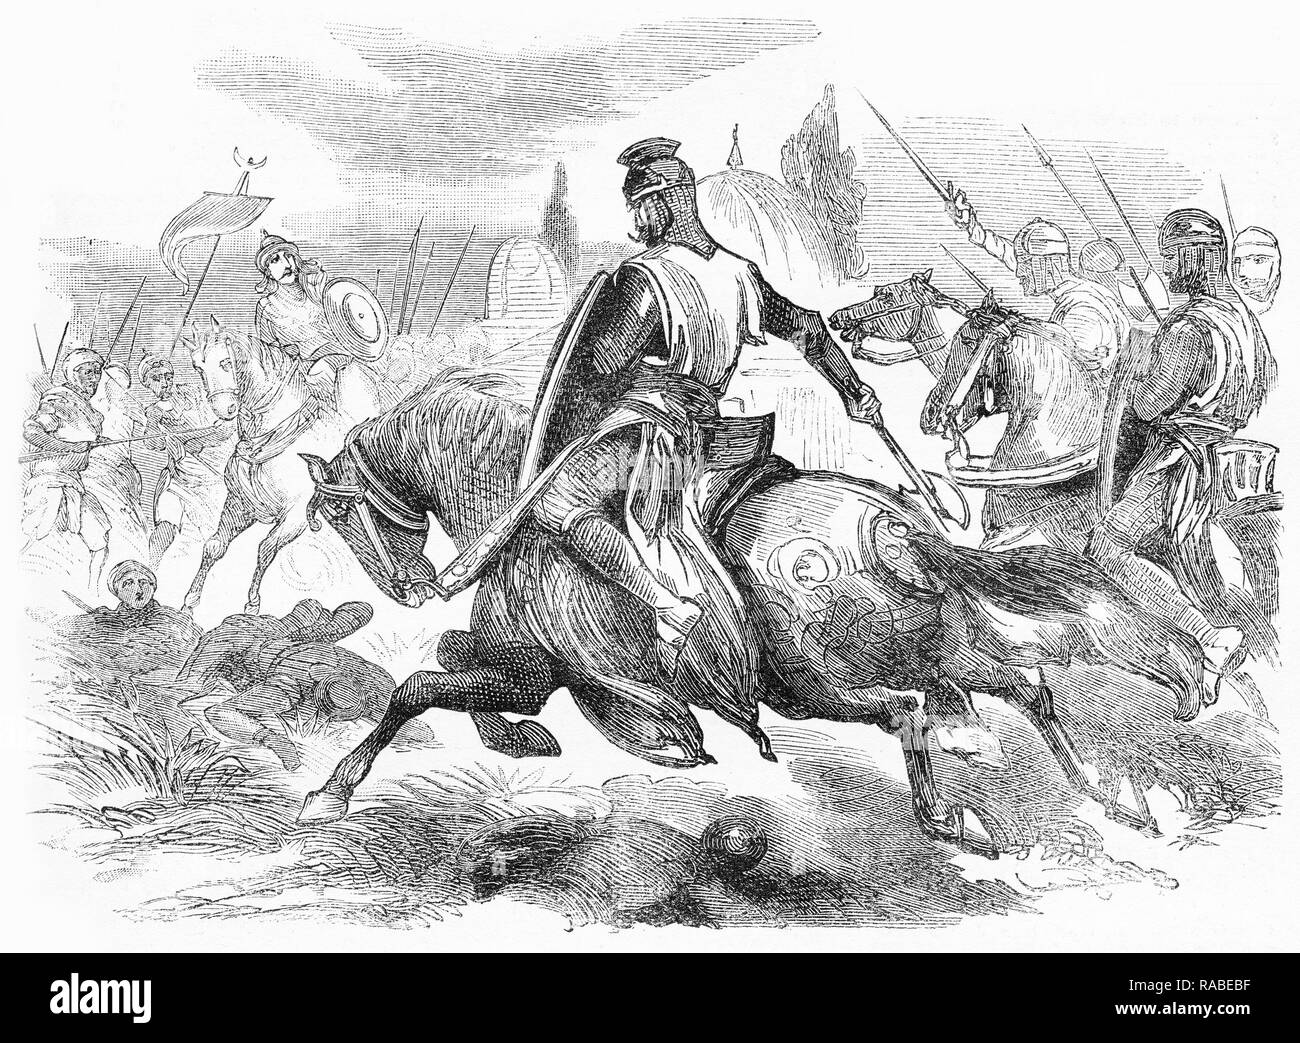 Engraving of mounted crusaders charging into battle against the Turks. From an original engraving in the Boys of England magazine 1894. Stock Photo